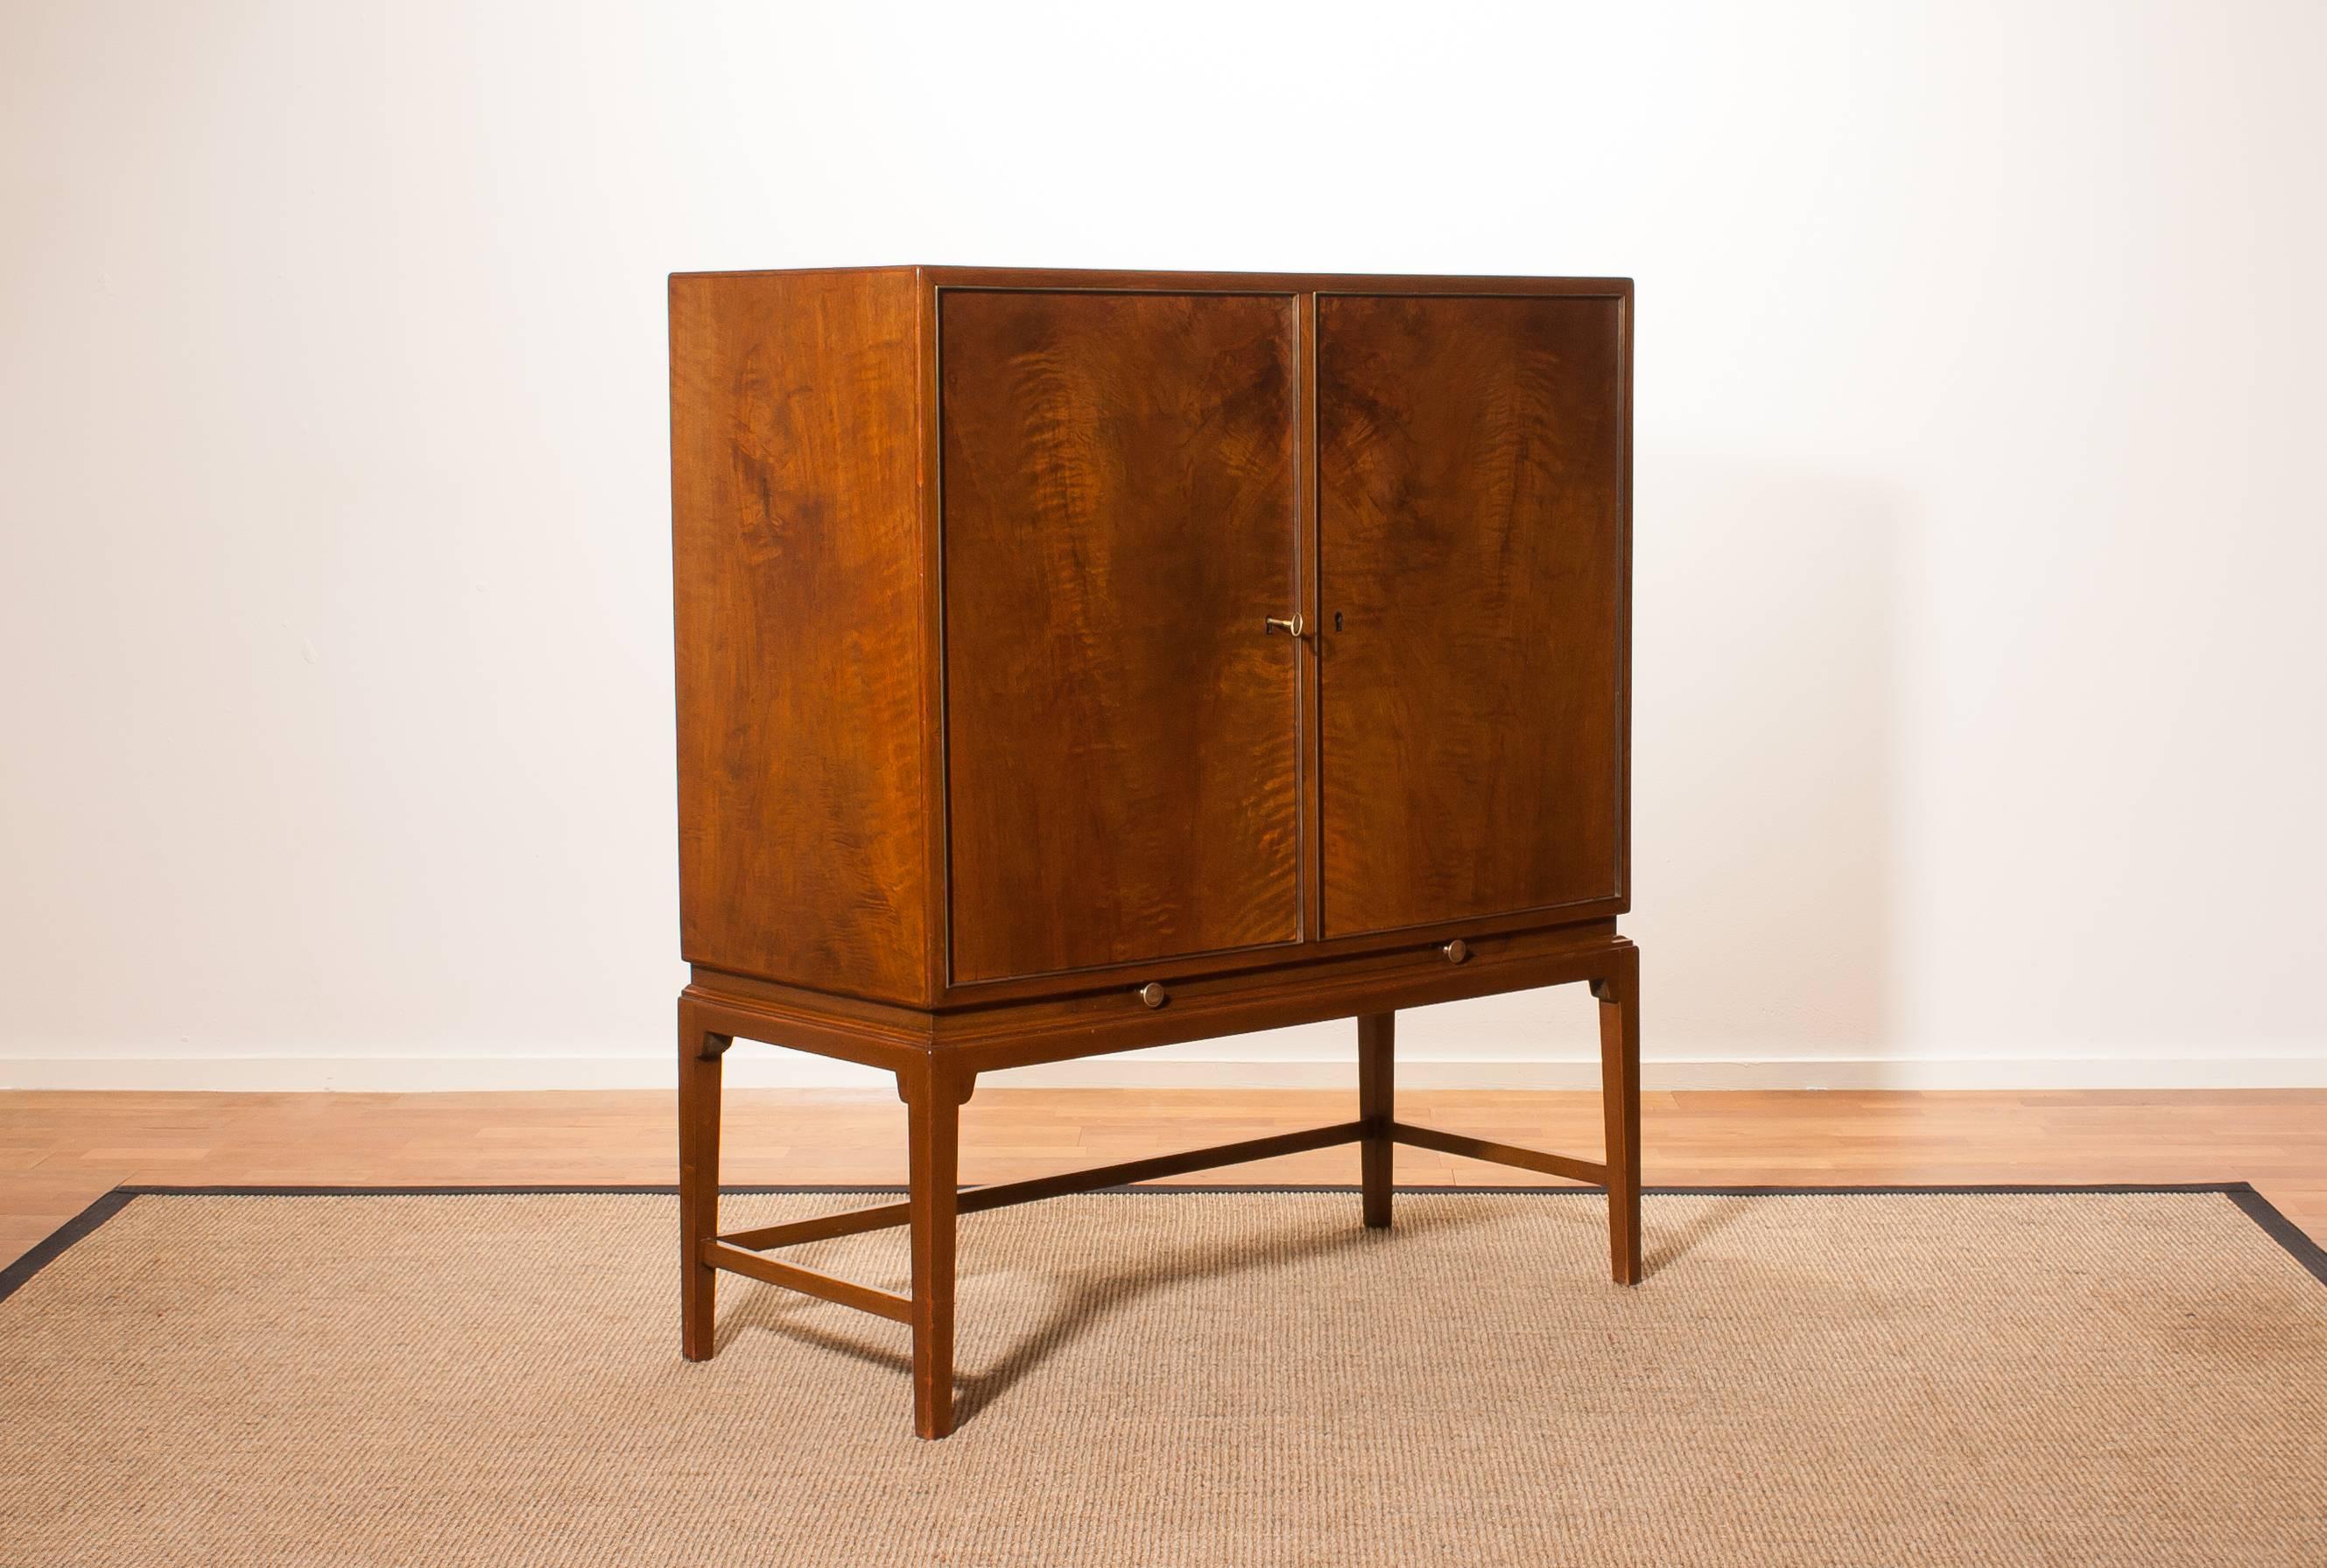 Beautiful burl wood cabinet by Boet Sweden .
This cabinet has five drawers inside and a extendable cocktail leaf made of glass.
The doors are brass framed.
It is in a very nice condition.
Period 1950s
Dimensions : H.116 cm , W.100 cm , D.44 cm